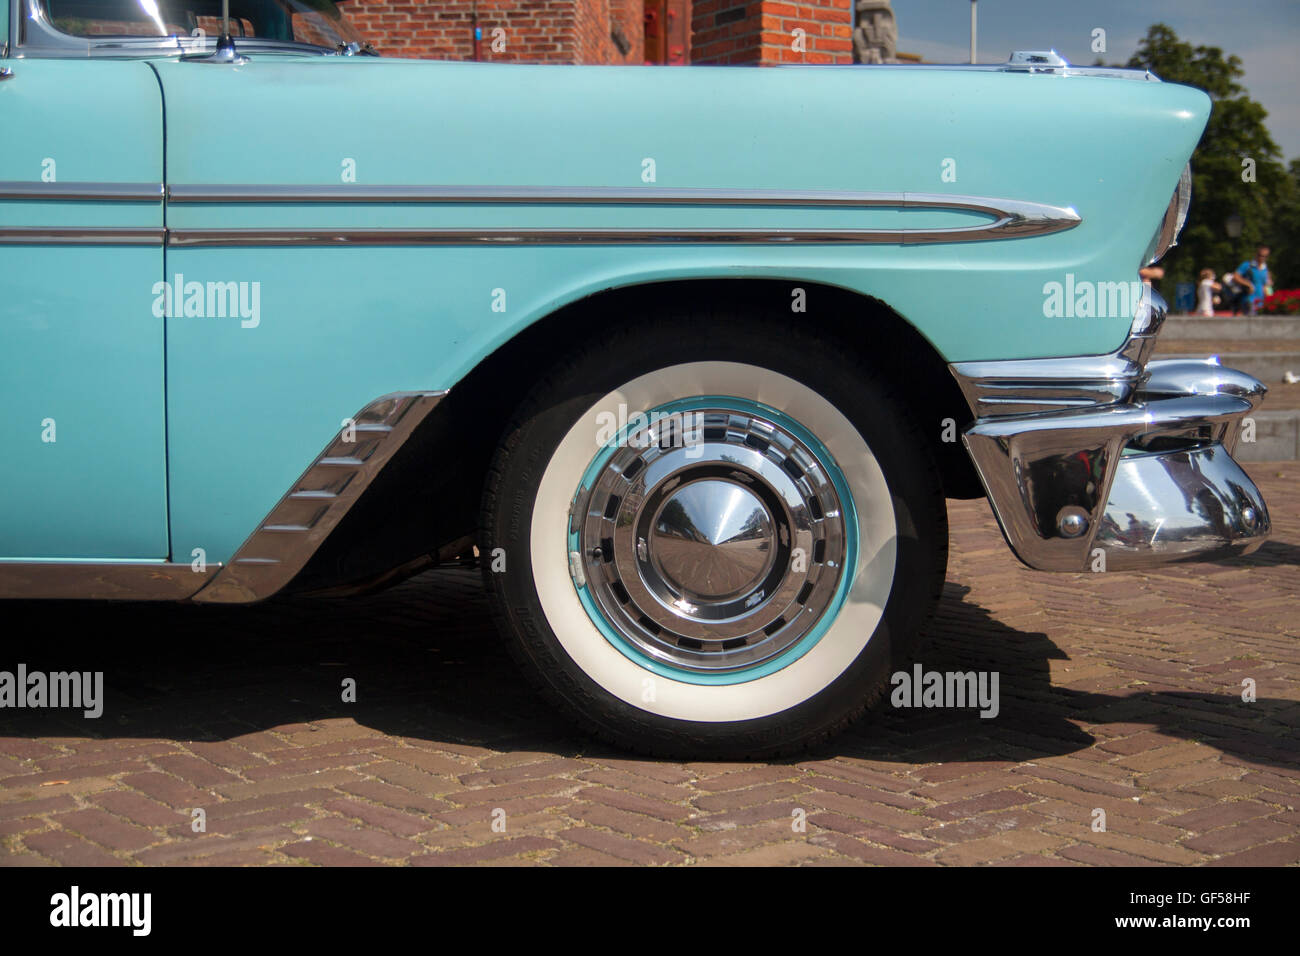 MEDEMBLIK, THE NETHERLANDS - JULY 27,2014: Side view of a Chevrolet bel air 1956 on a oldtimer show Stock Photo